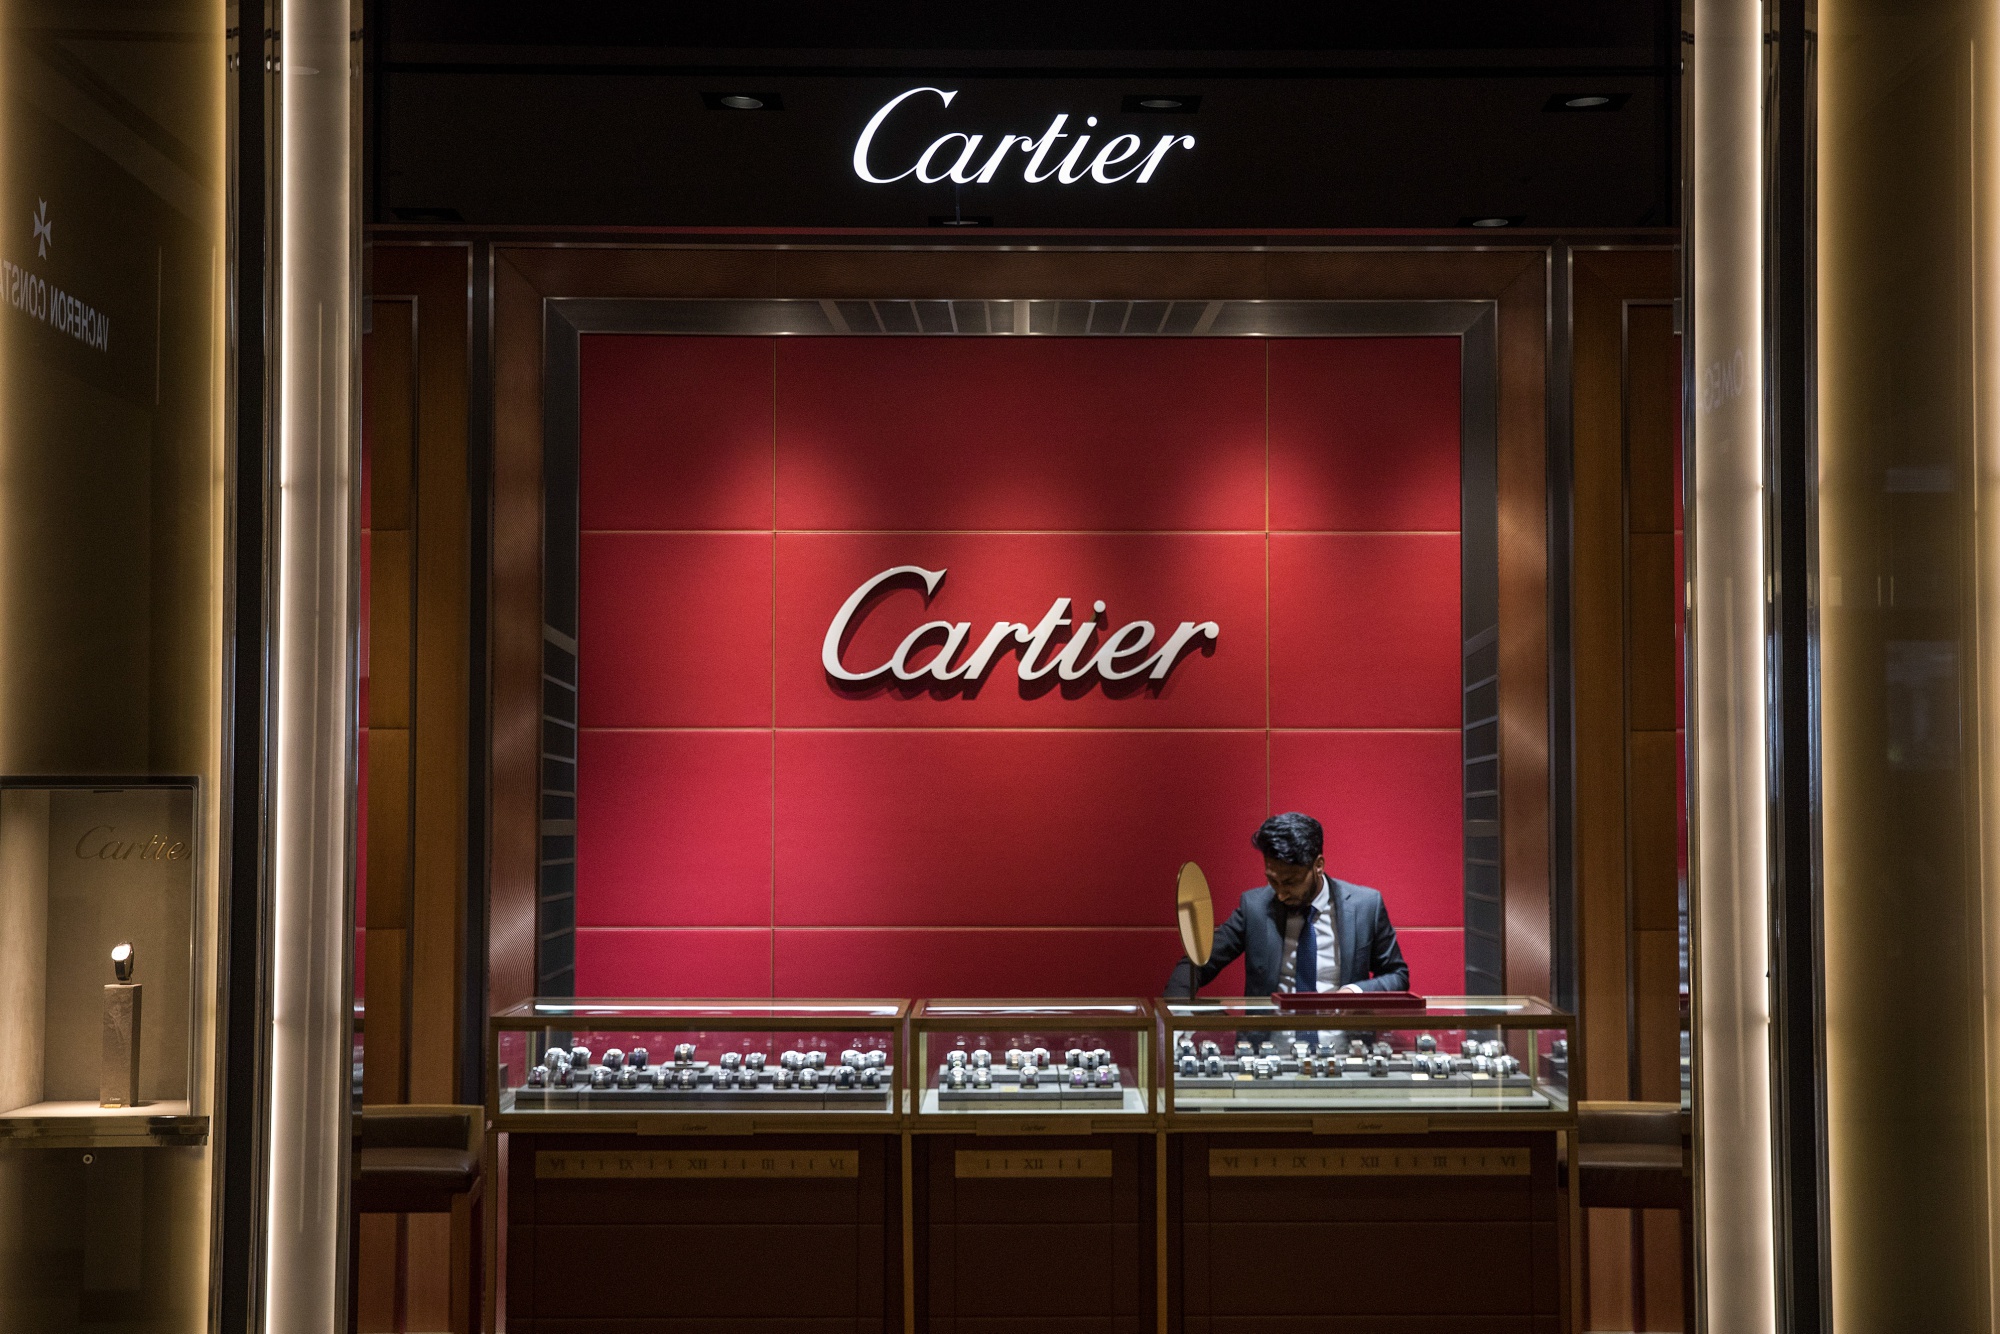 Cartier Launches New Store on Tmall Luxury Pavilion